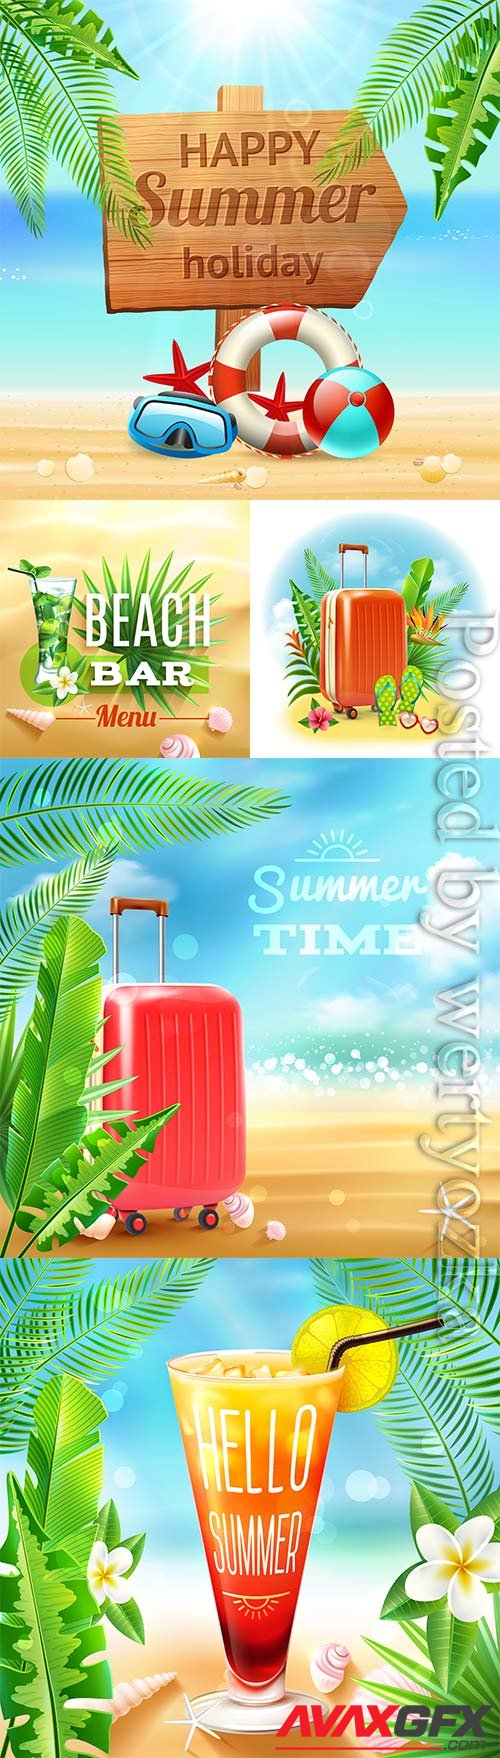 Summer vacation, sea, palm trees, cocktails in vector vol 6